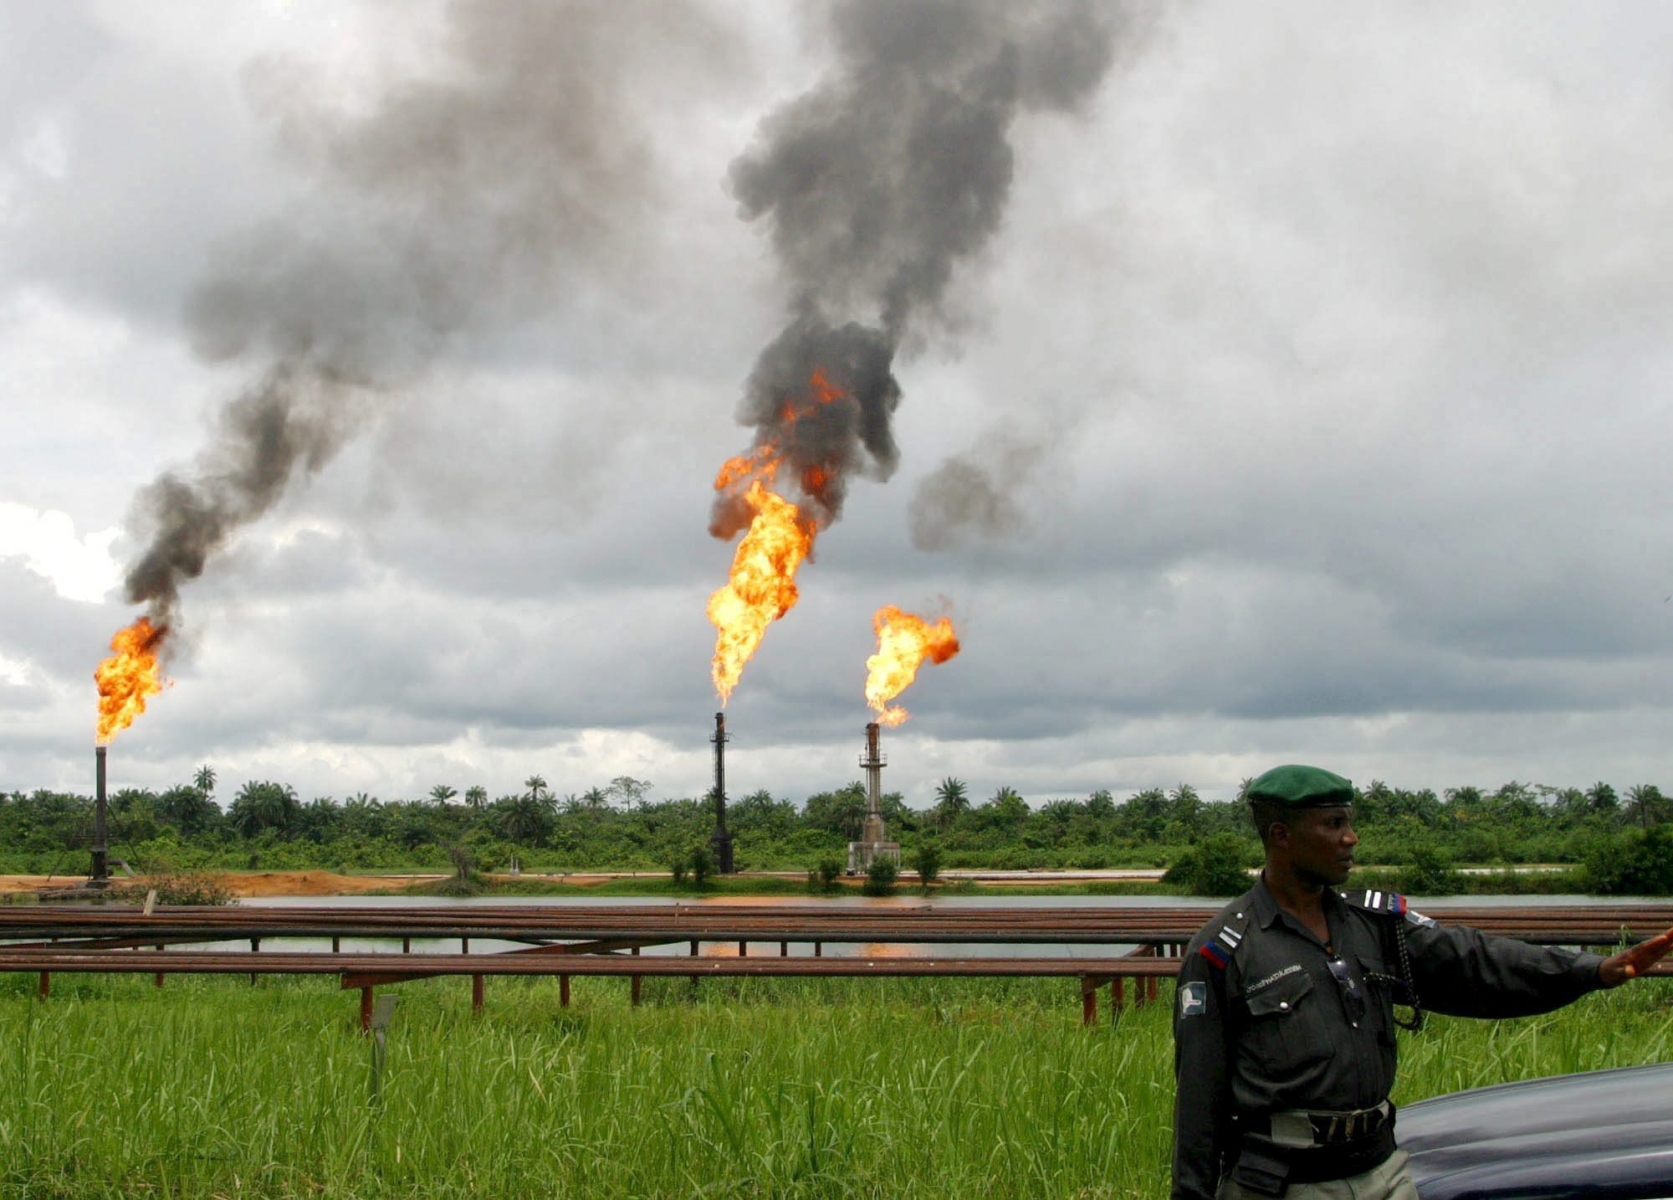 Extraction du petrole au Nigeria

A Nigerian policeman stops to search an oncoming car near burning gas flares belonging to Agip oil company in Ebocha near oil rich city of Port Harcourt on Sept. 10, 2004. Insurgents fighting for control of Nigeria's rich southern oil fields said Sunday Sept 26, 2004 that helicopters belonging to Italian oil firm Agip are helping government forces target their positions, and the rebels threatened retaliation against the company ENERGIE